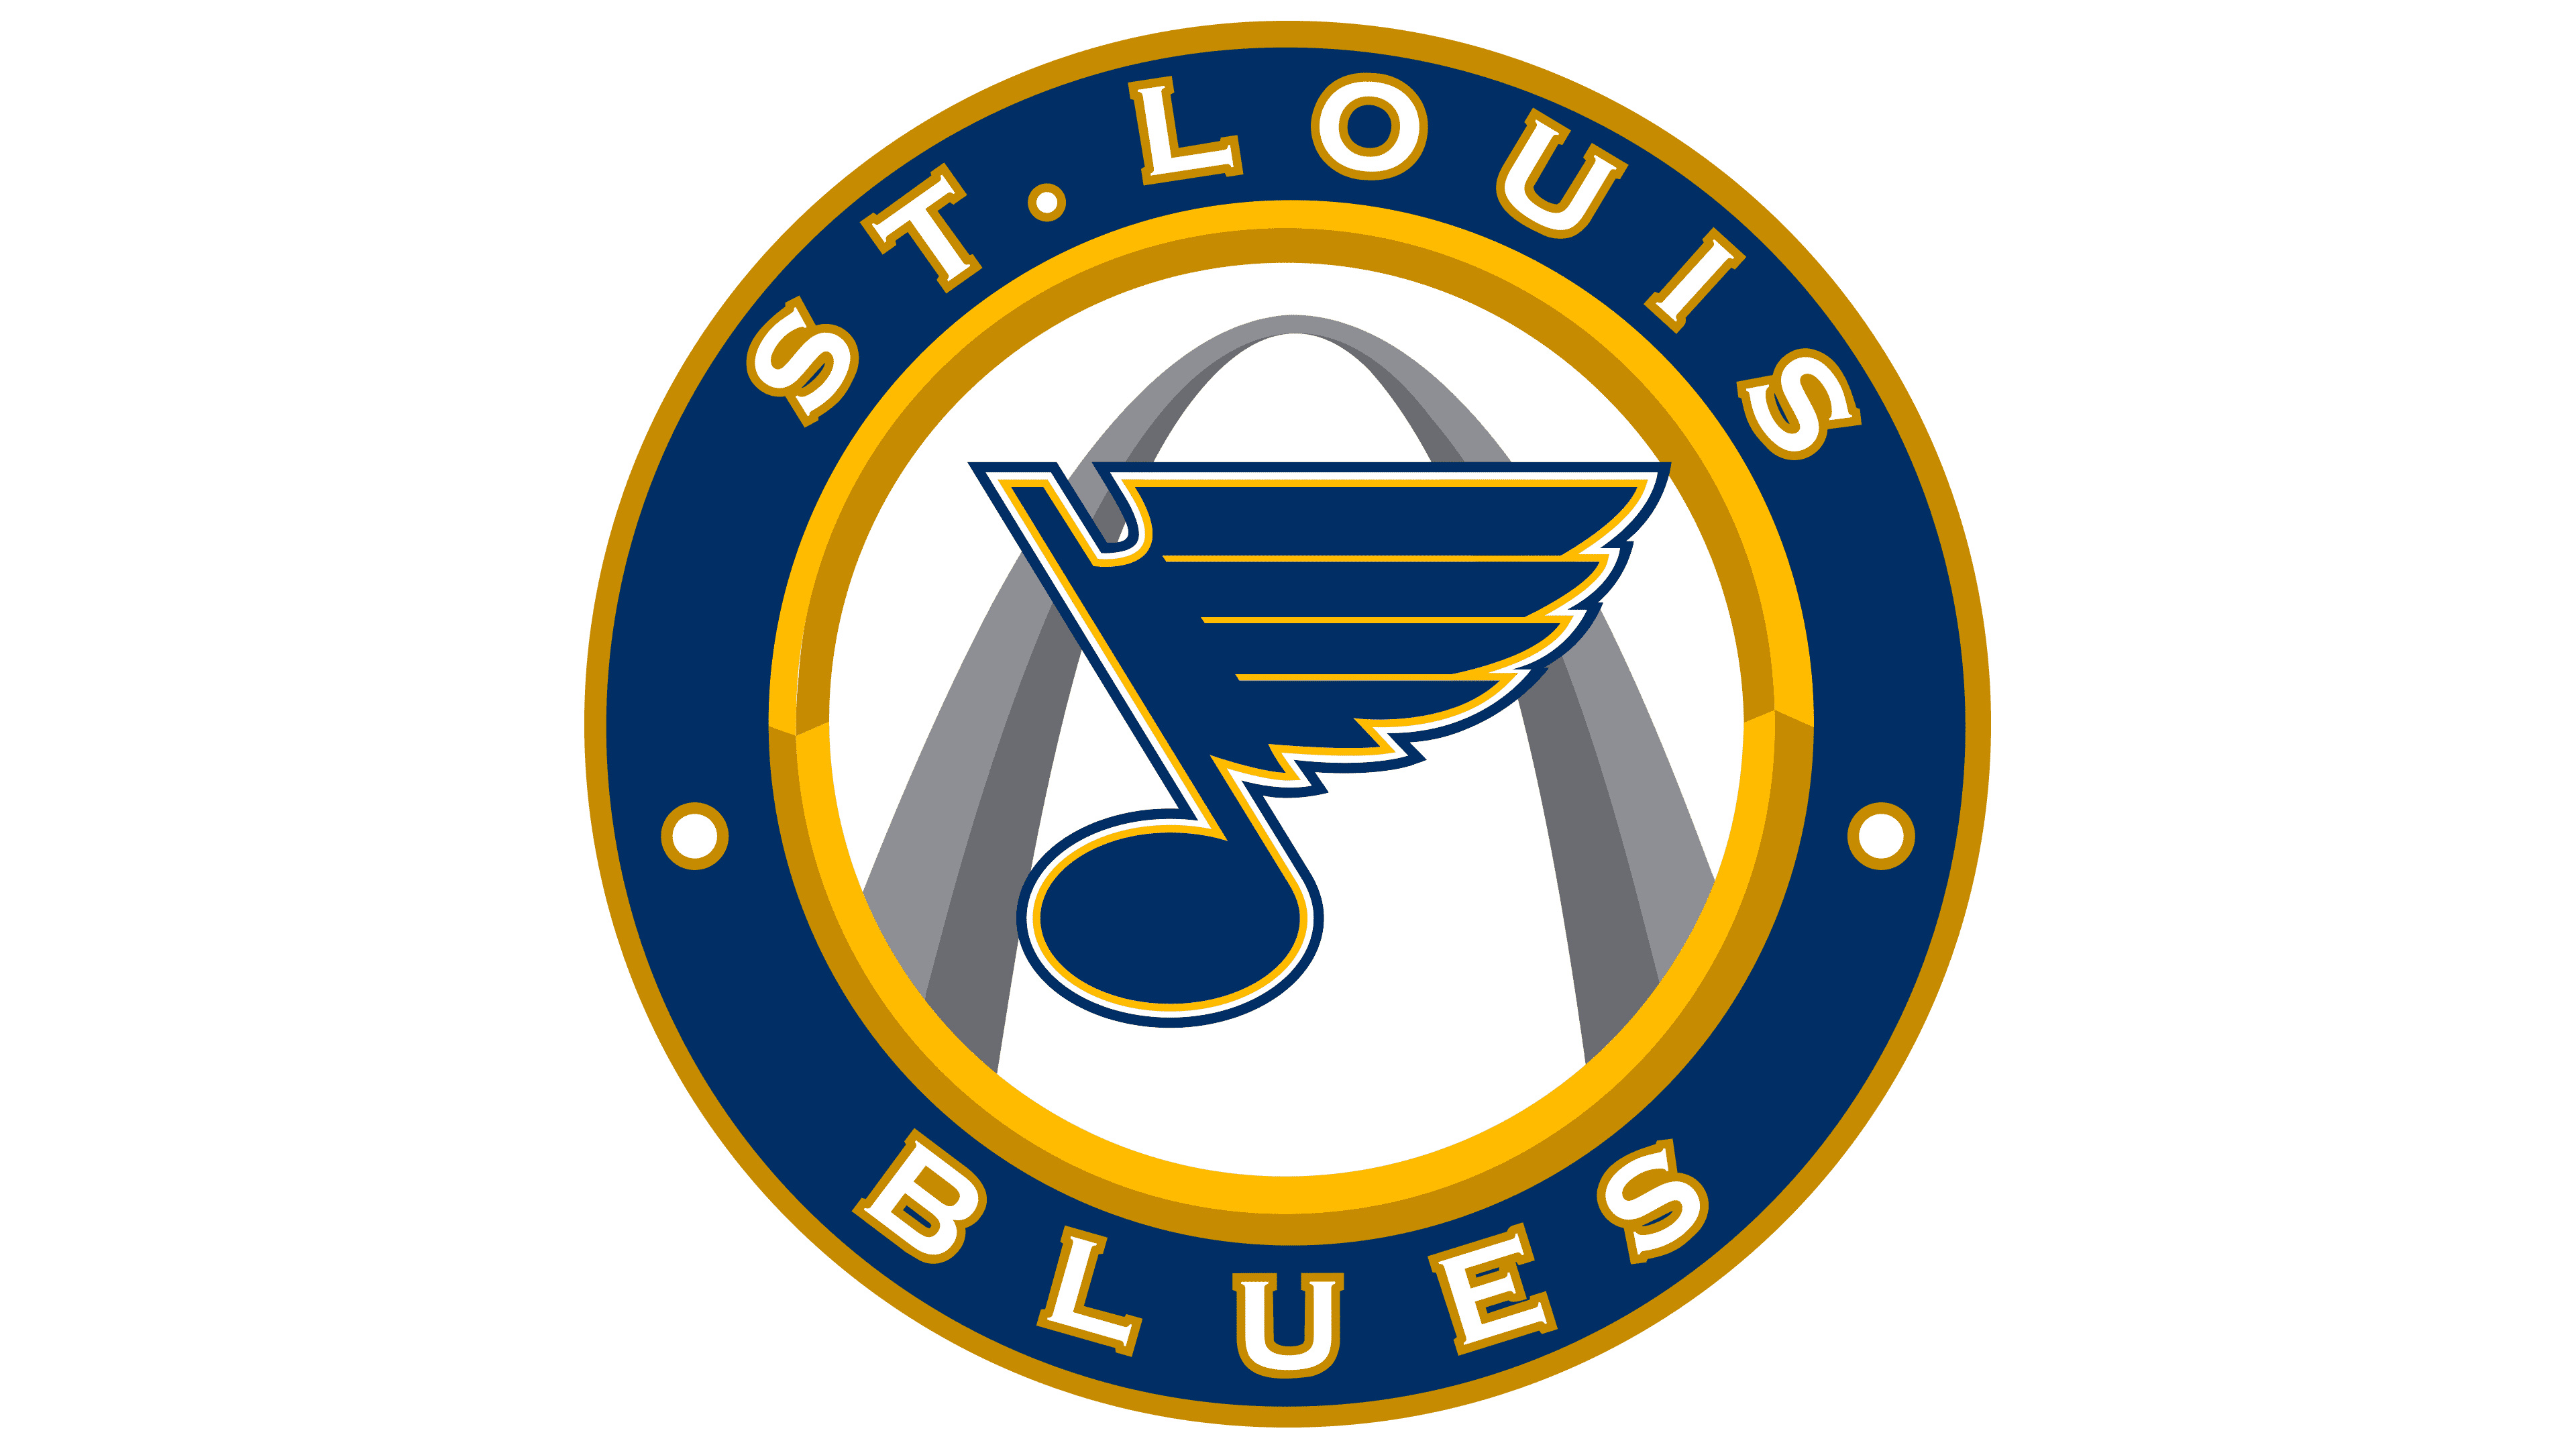 St. Louis Blues Sports, Logo and symbol meaning, Team history and branding, 3840x2160 4K Desktop